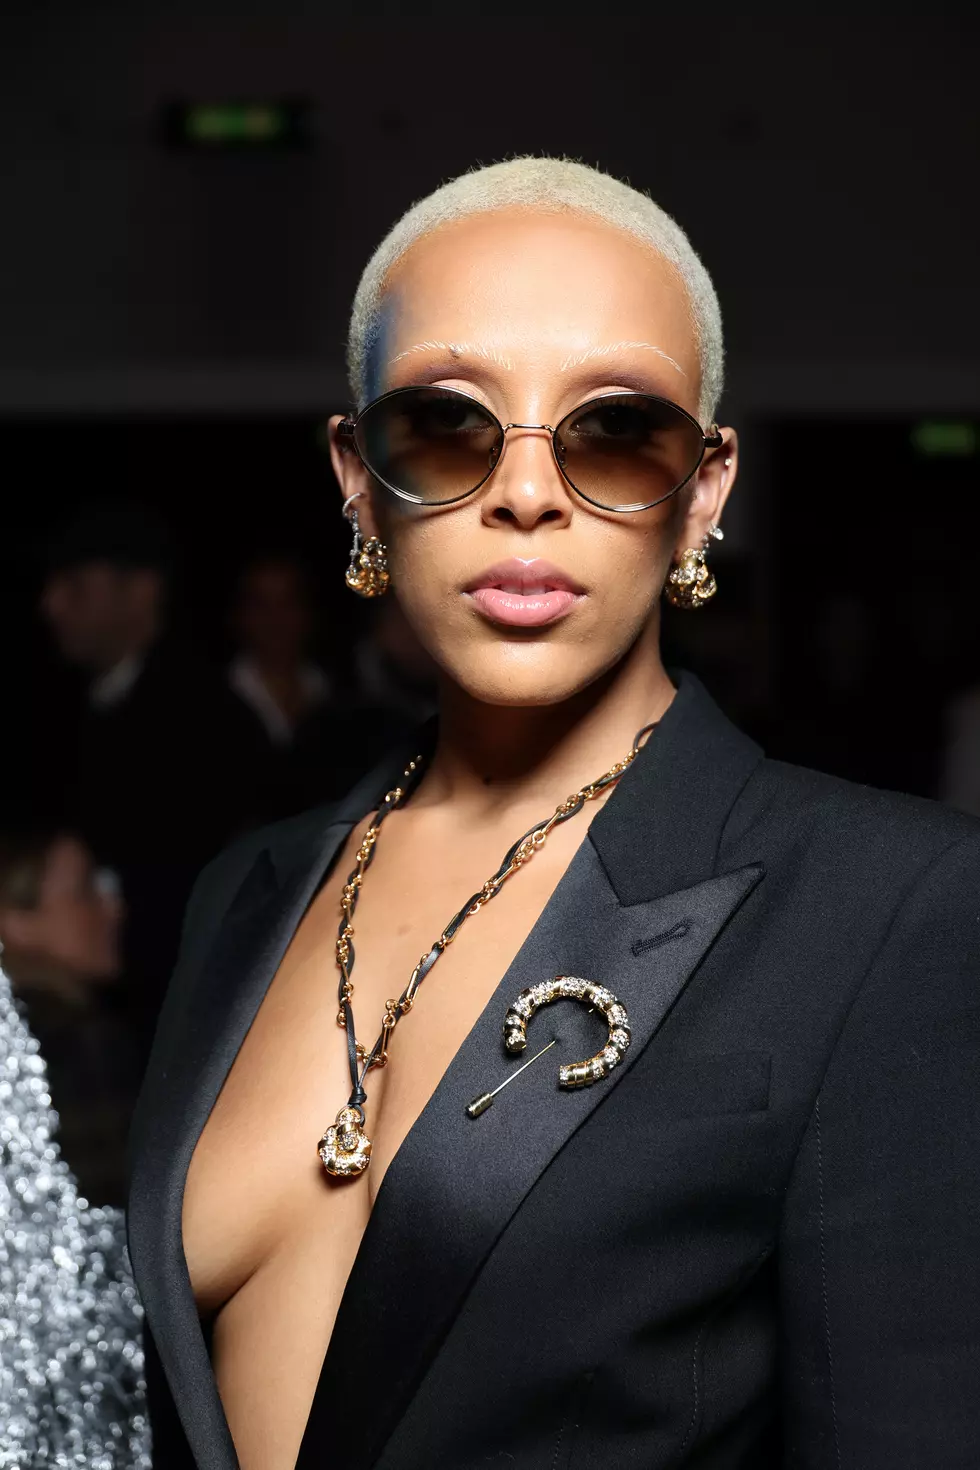 Doja Cat attends the Lanvin Womenswear Spring/Summer 2023 show as part of Paris Fashion Week  on October 03, 2022 in Paris, France.